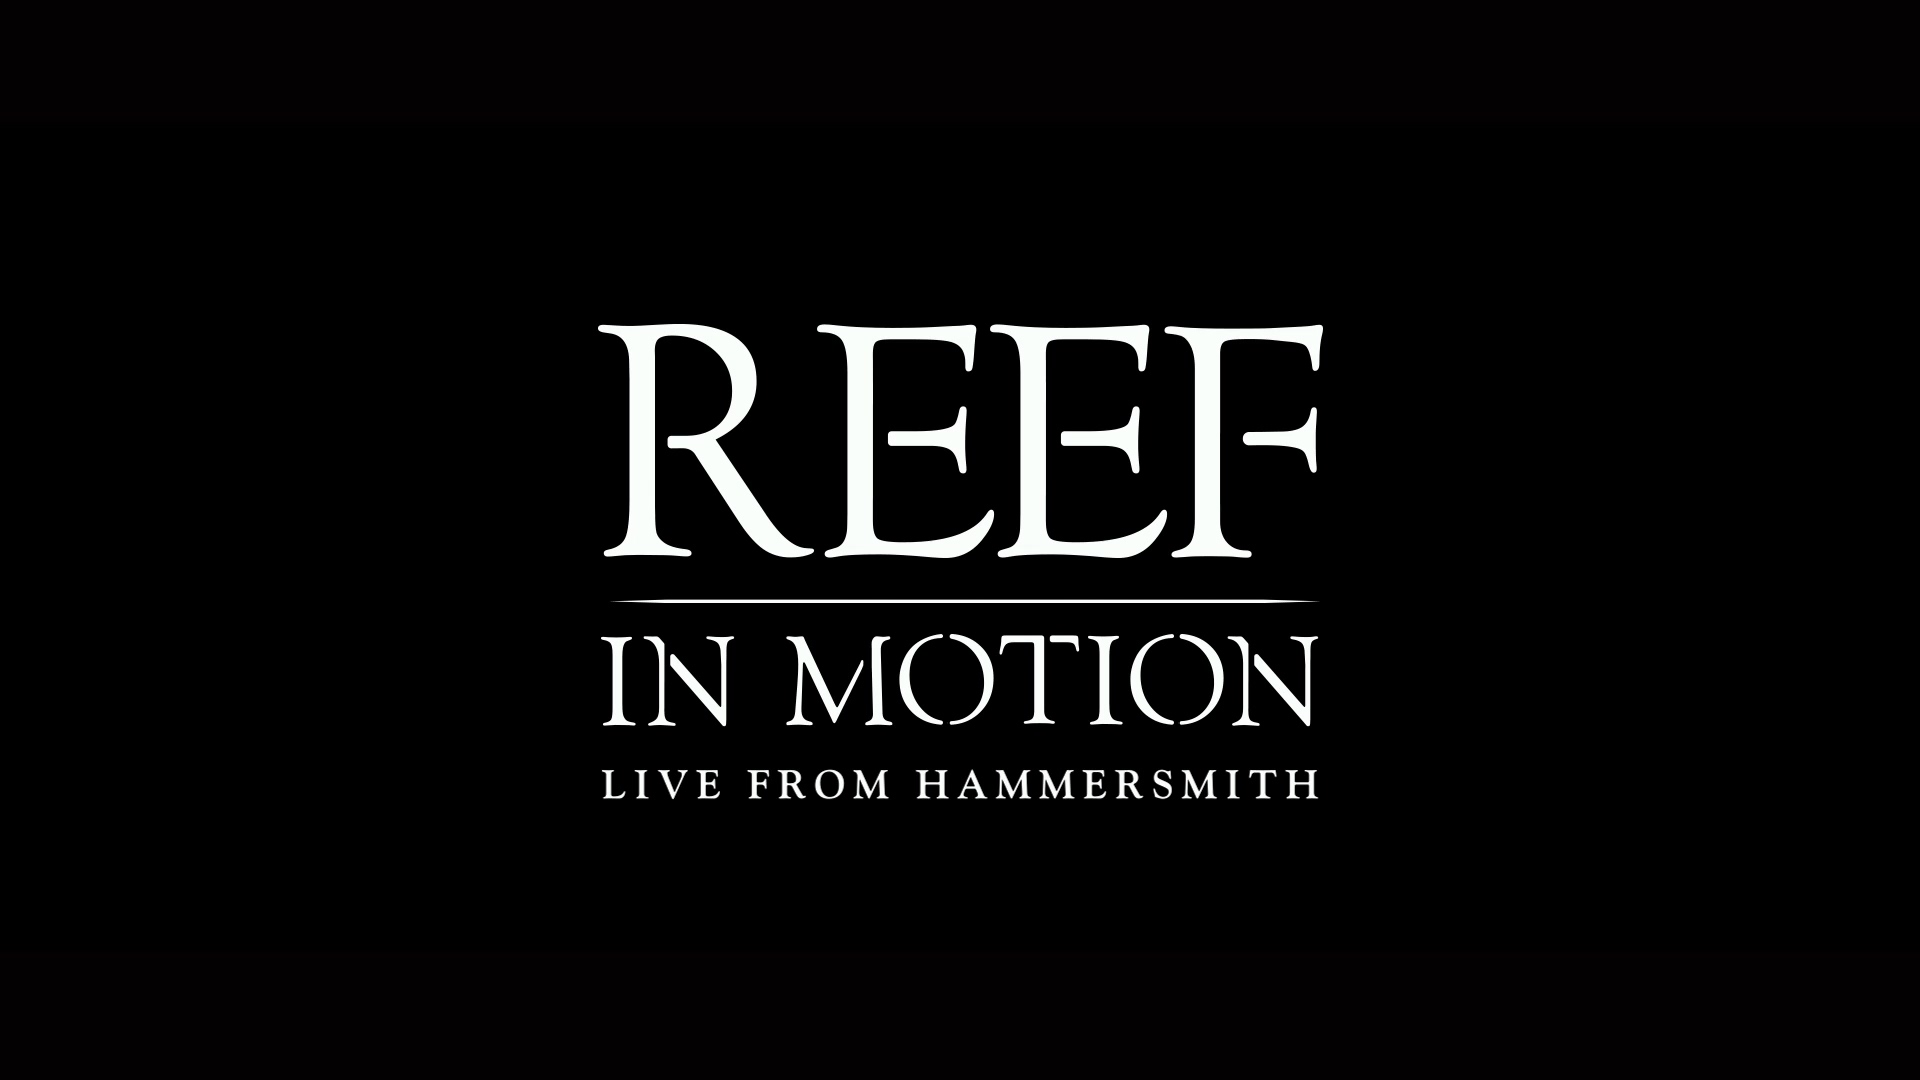 00002.m2ts(Reef - In Motion - Live From Hammersmith  (2019))_20190330_141939.683.jpg